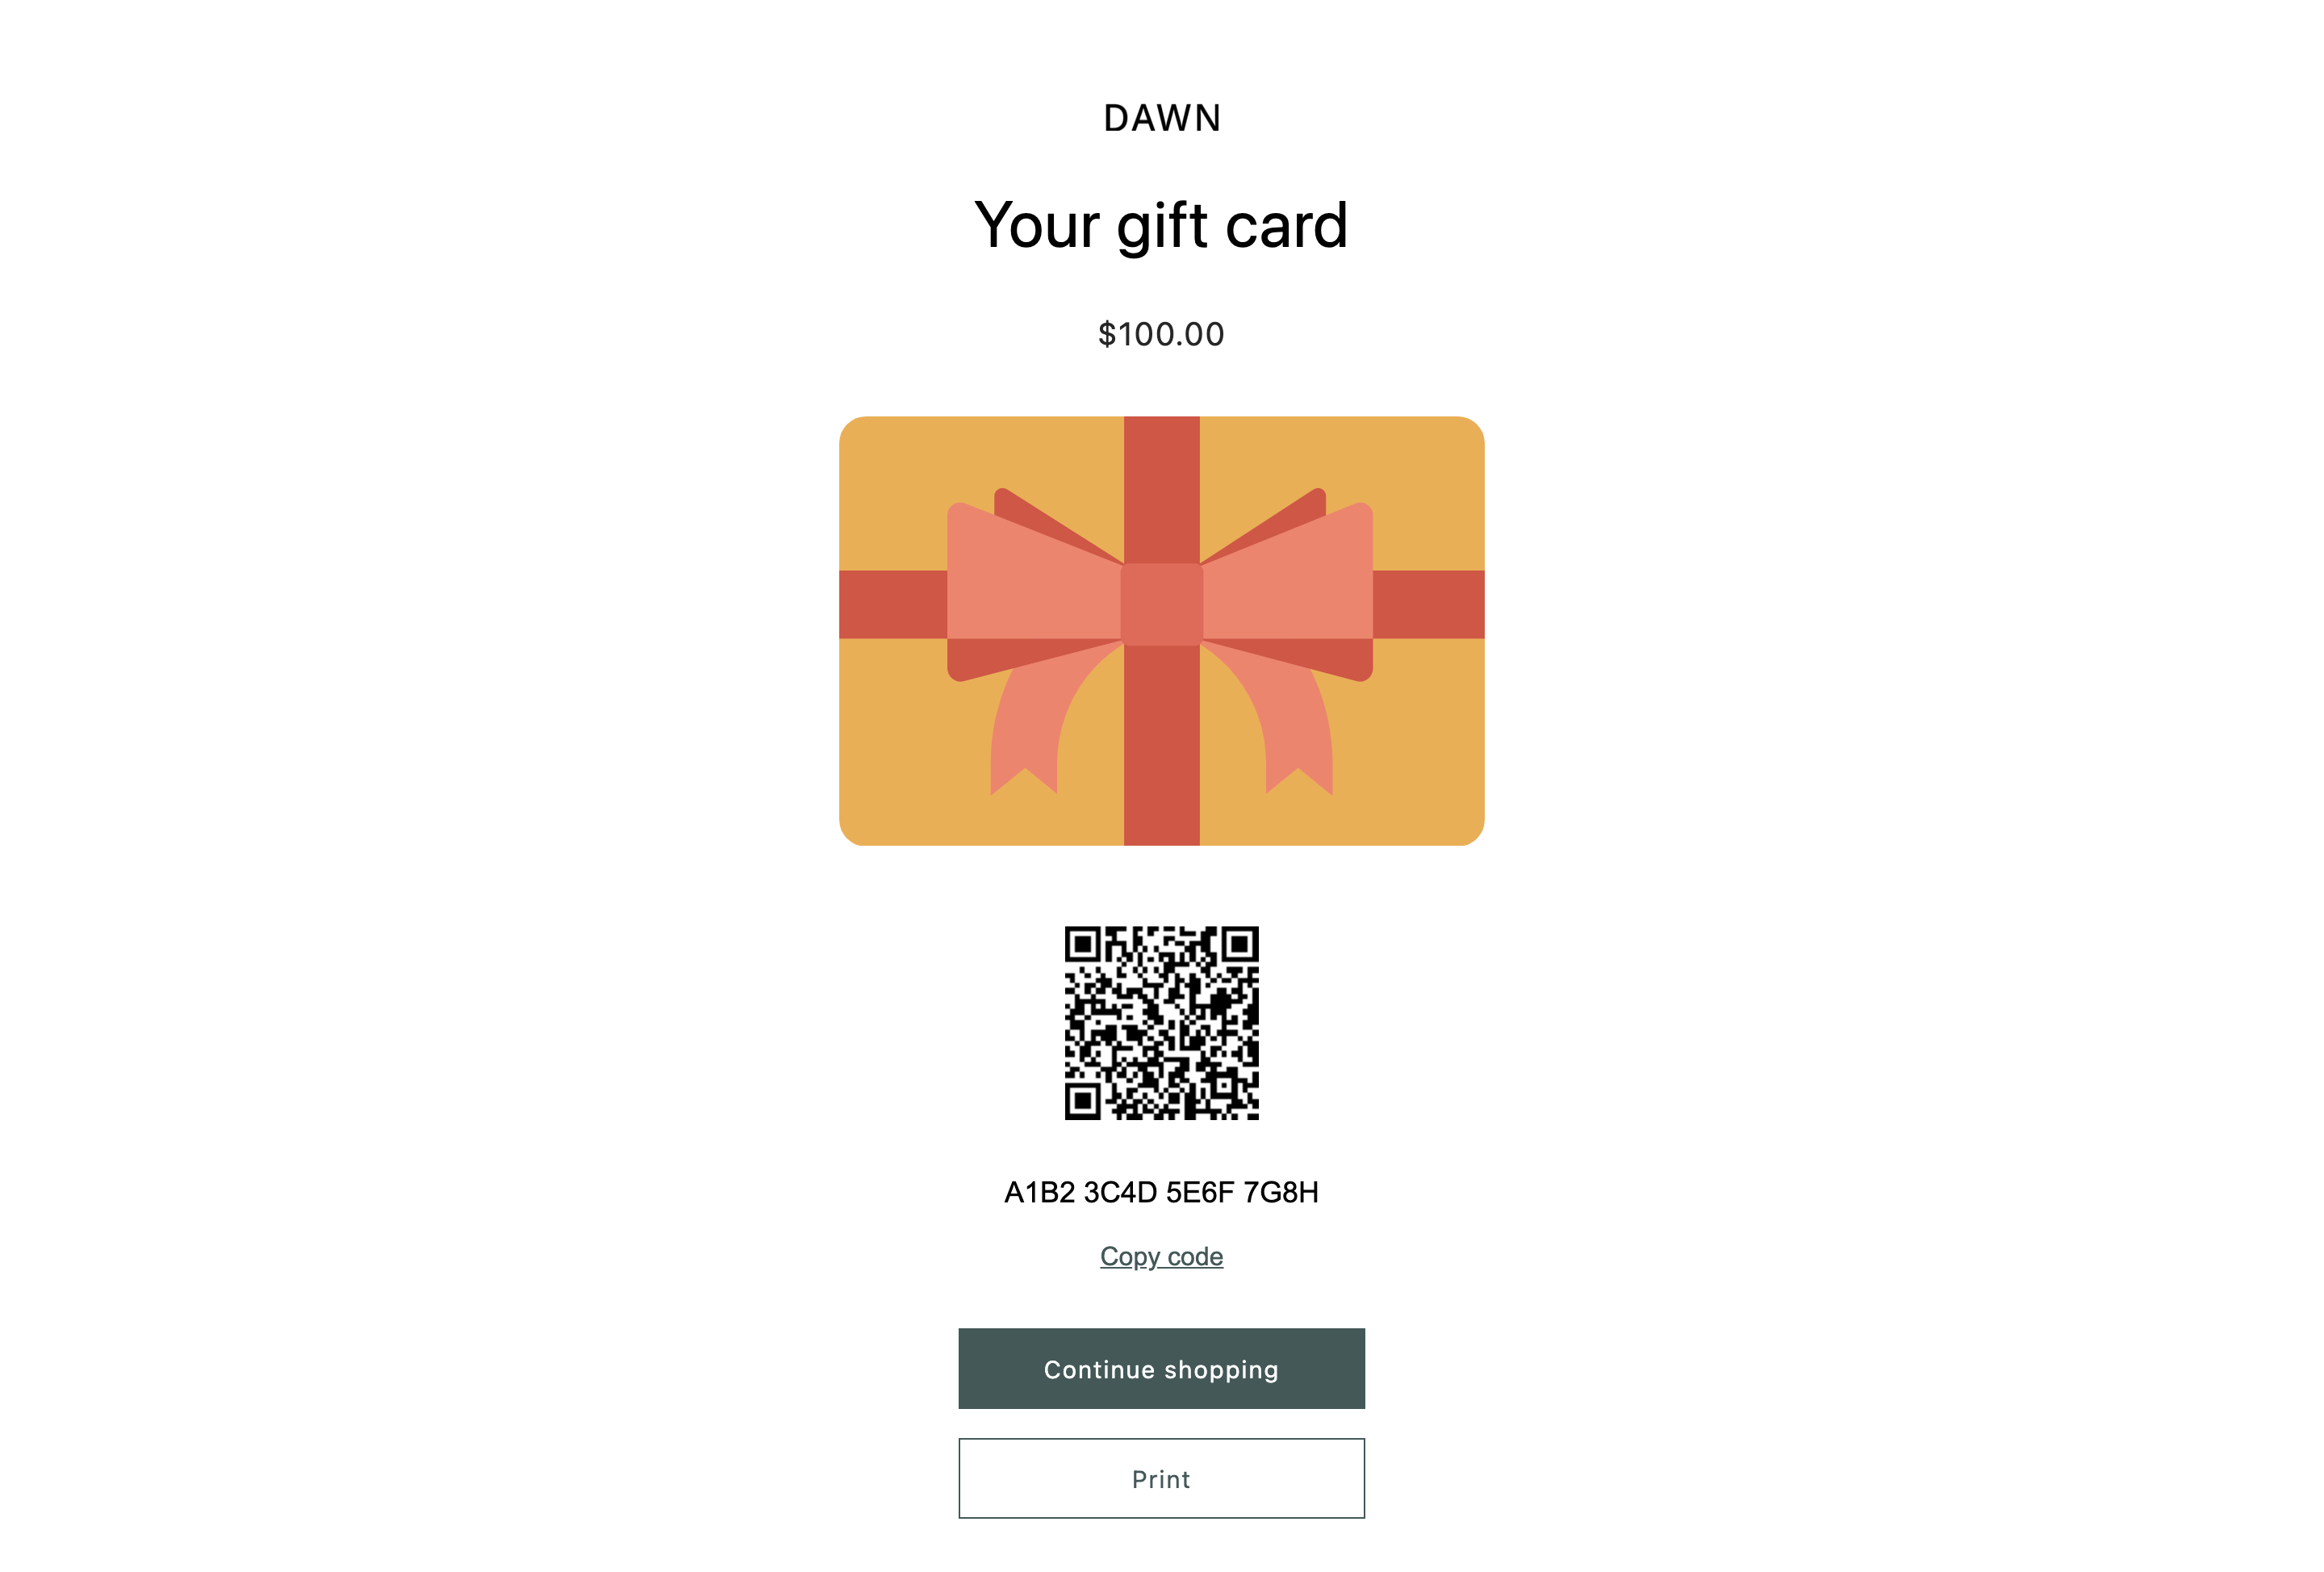 An example of the gift card template in Dawn